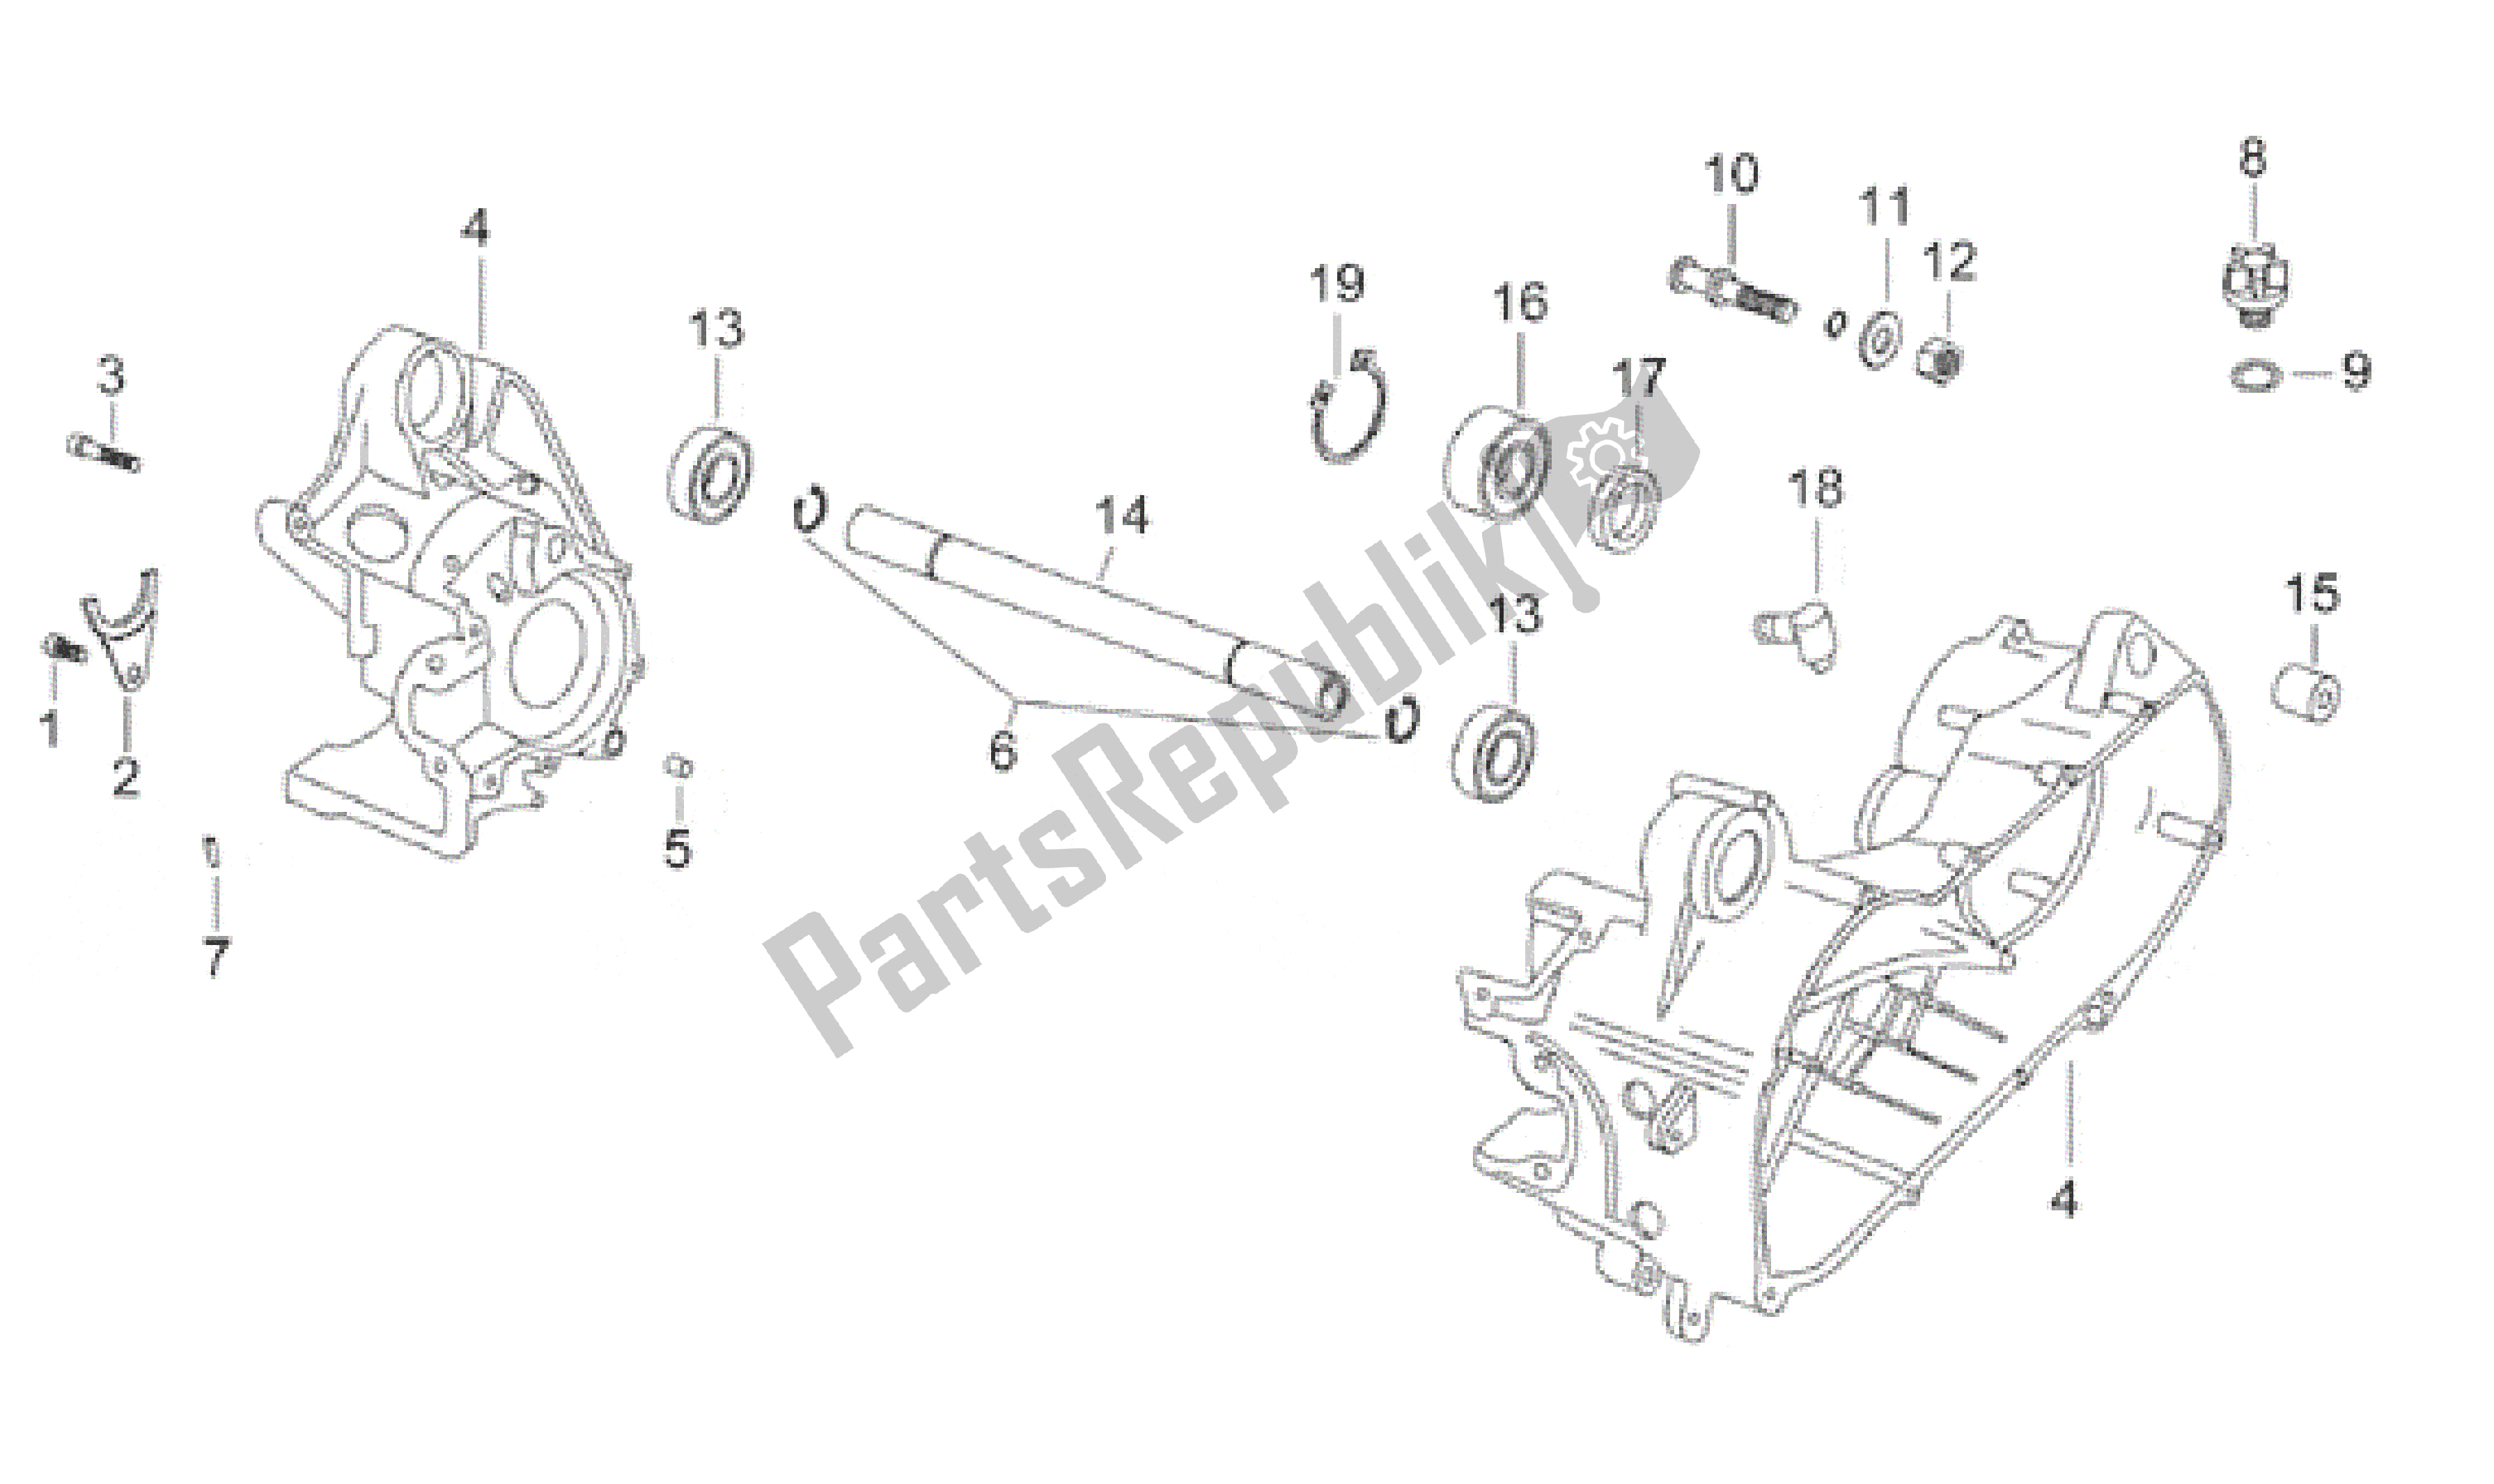 All parts for the Central Crank-case Set of the Aprilia Gulliver 50 1996 - 1998